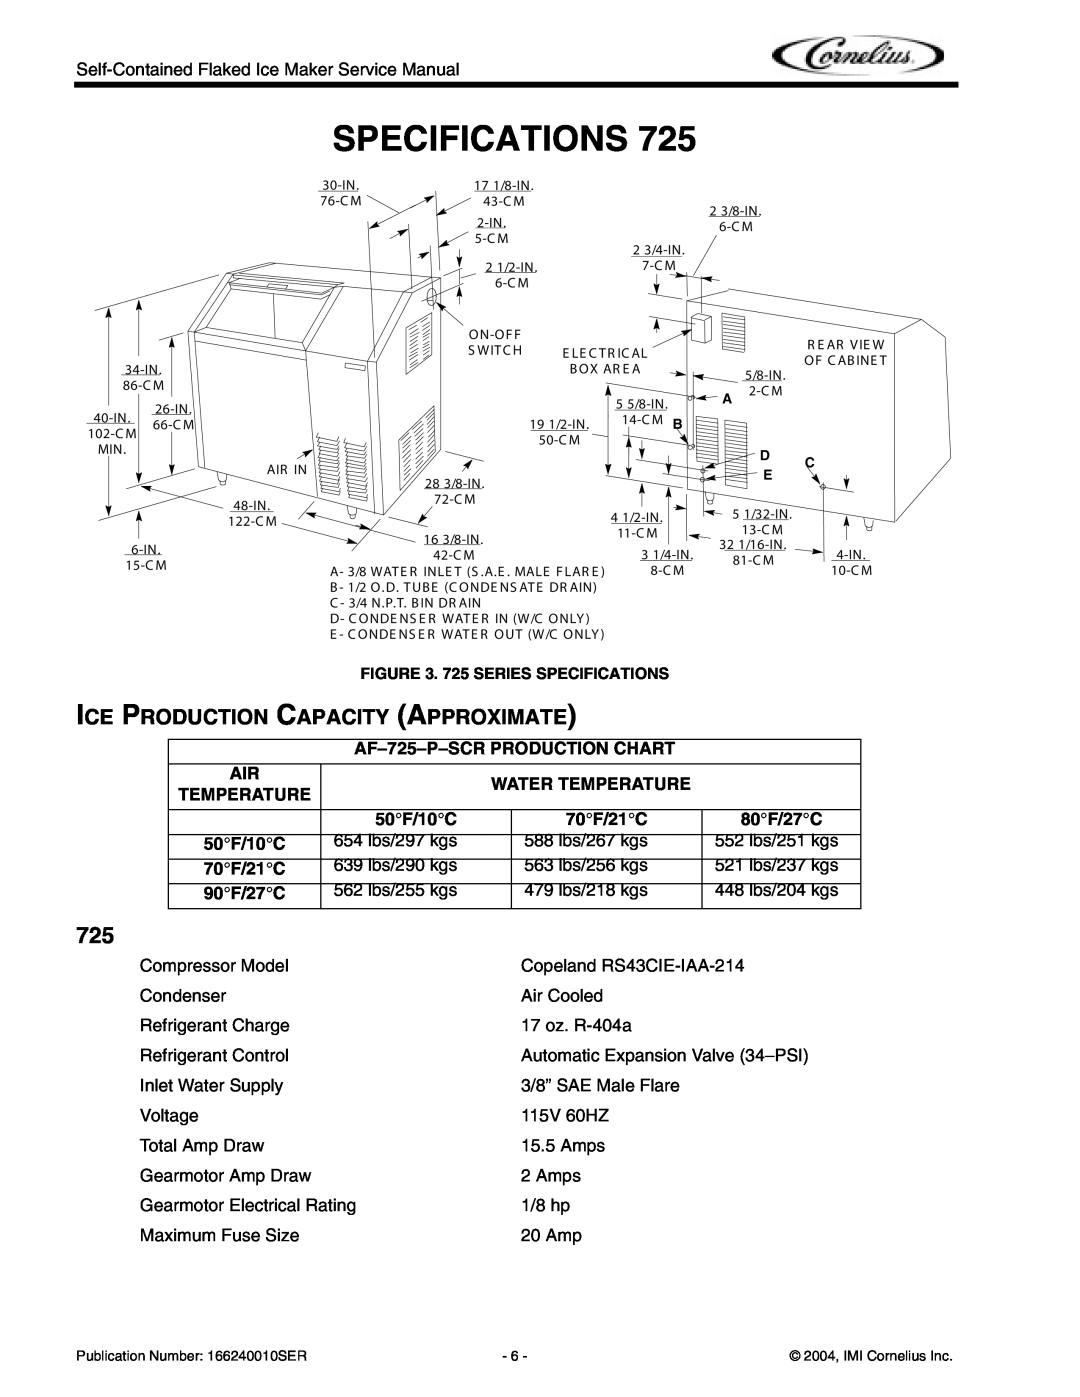 Cornelius Series 200, Series 525, Series 725 Specifications, Ice Production Capacity Approximate, 725 SERIES SPECIFICATIONS 